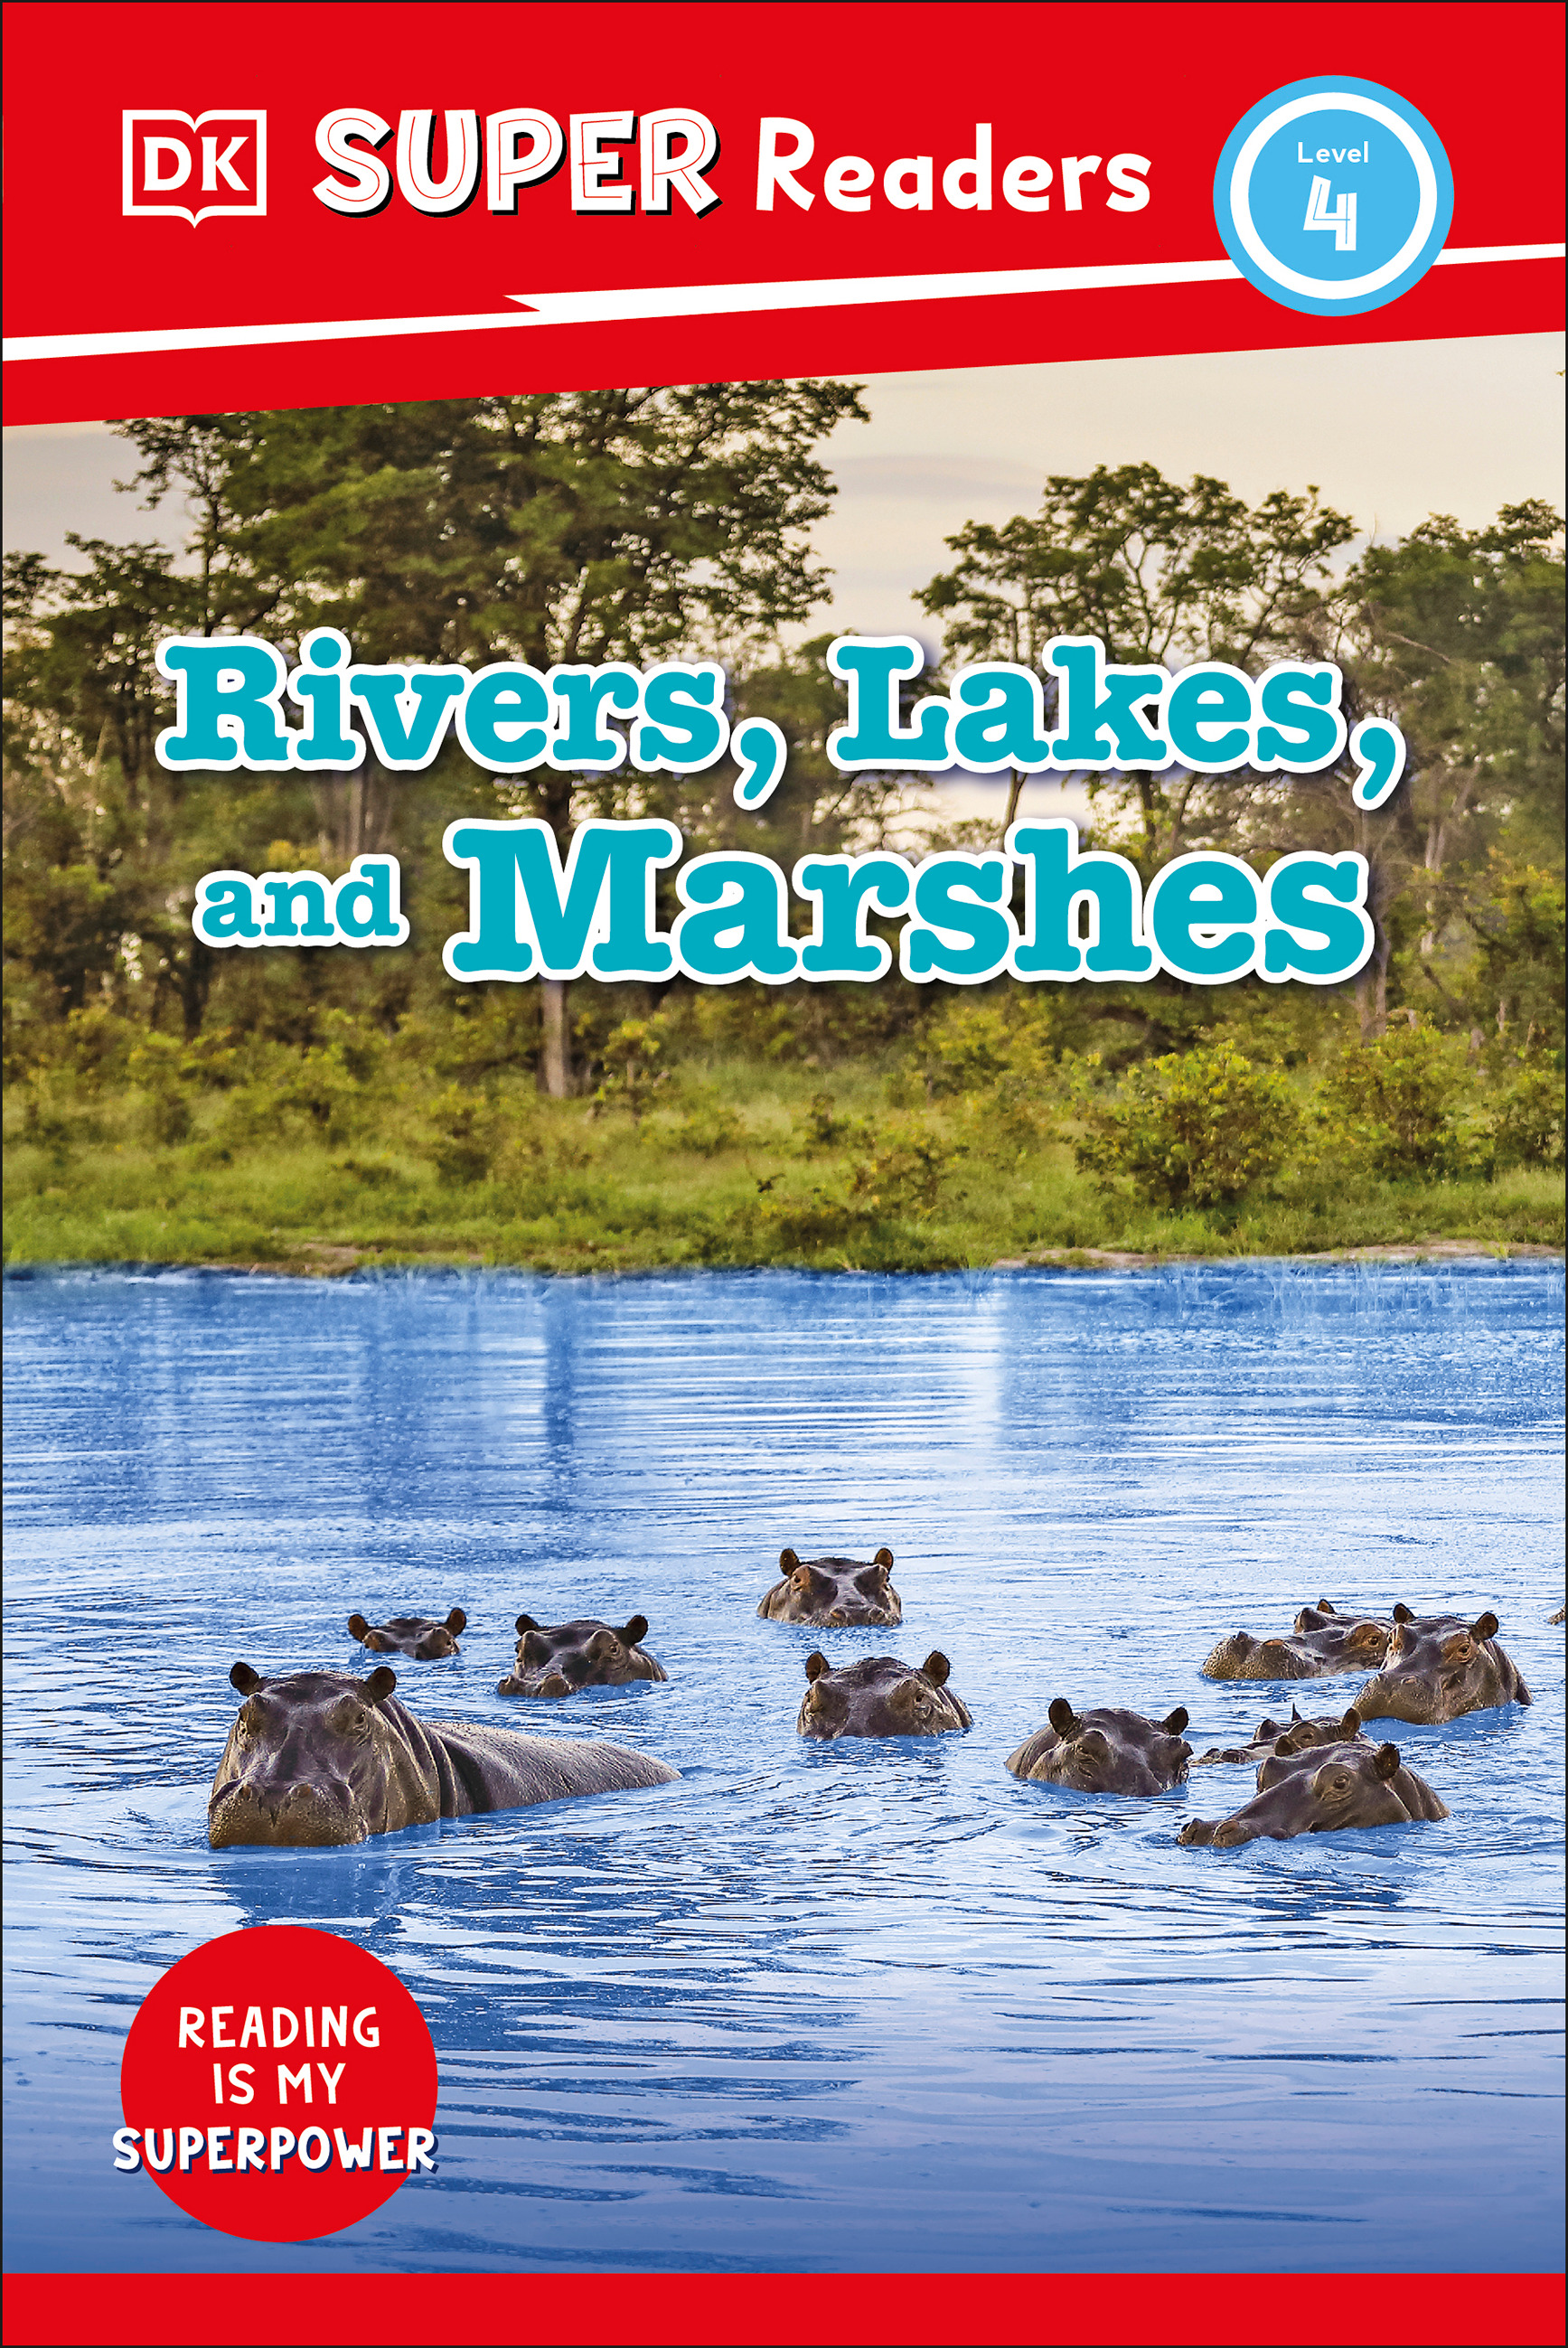 DK Super Readers Level 4 Rivers, Lakes, and Marshes | 